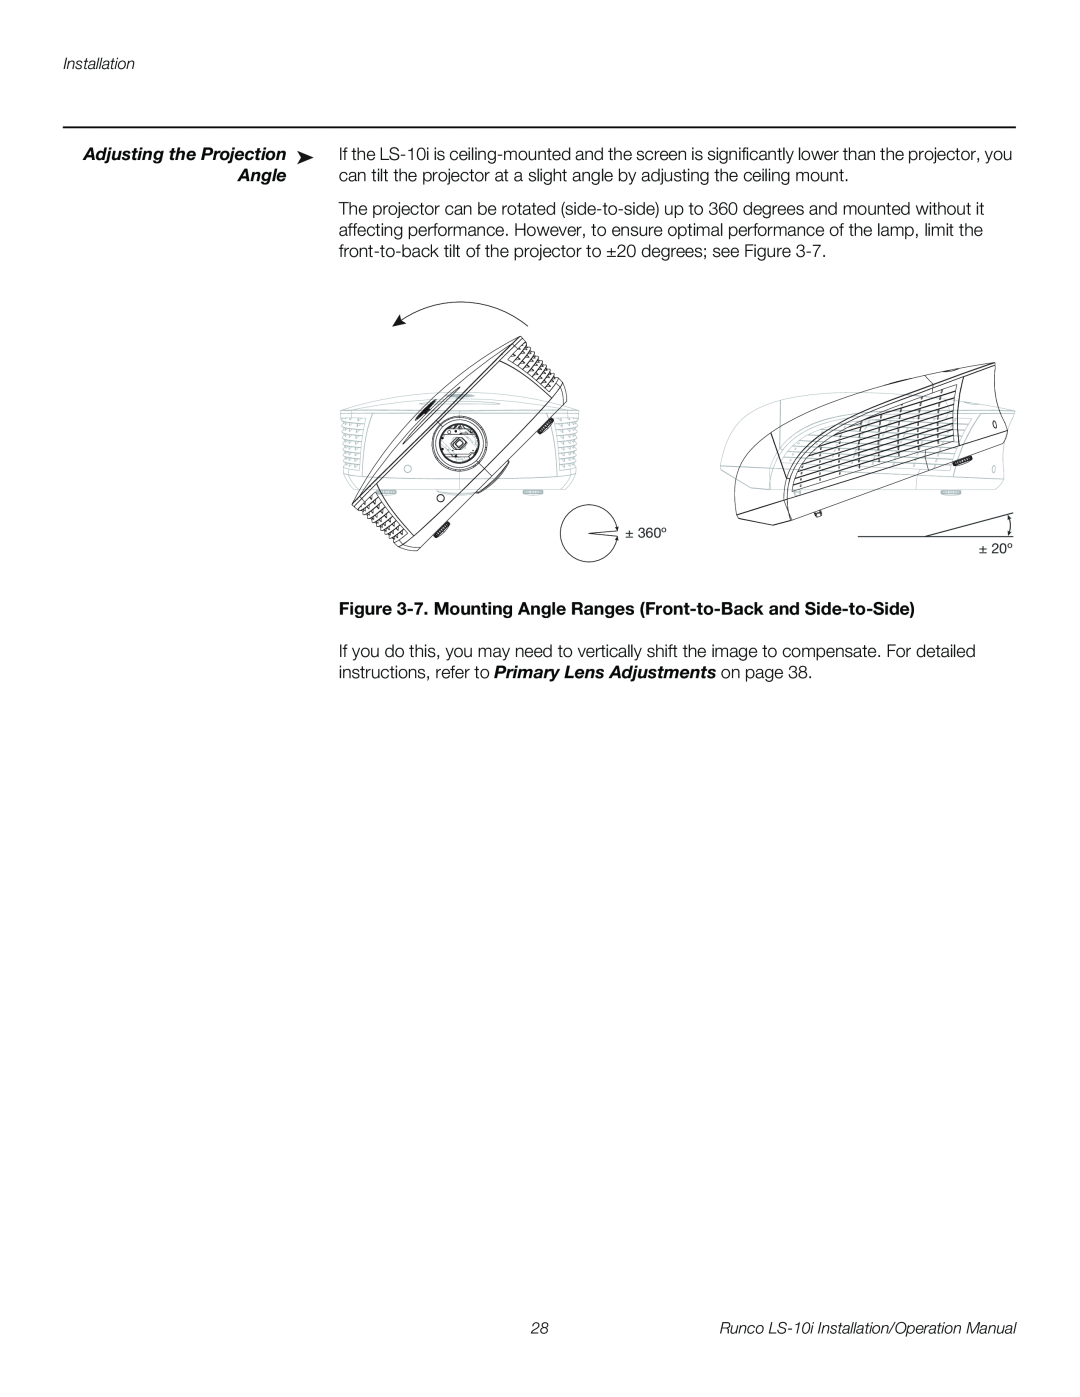 Runco LS-10I operation manual Adjusting the Projection, Angle, Installation 